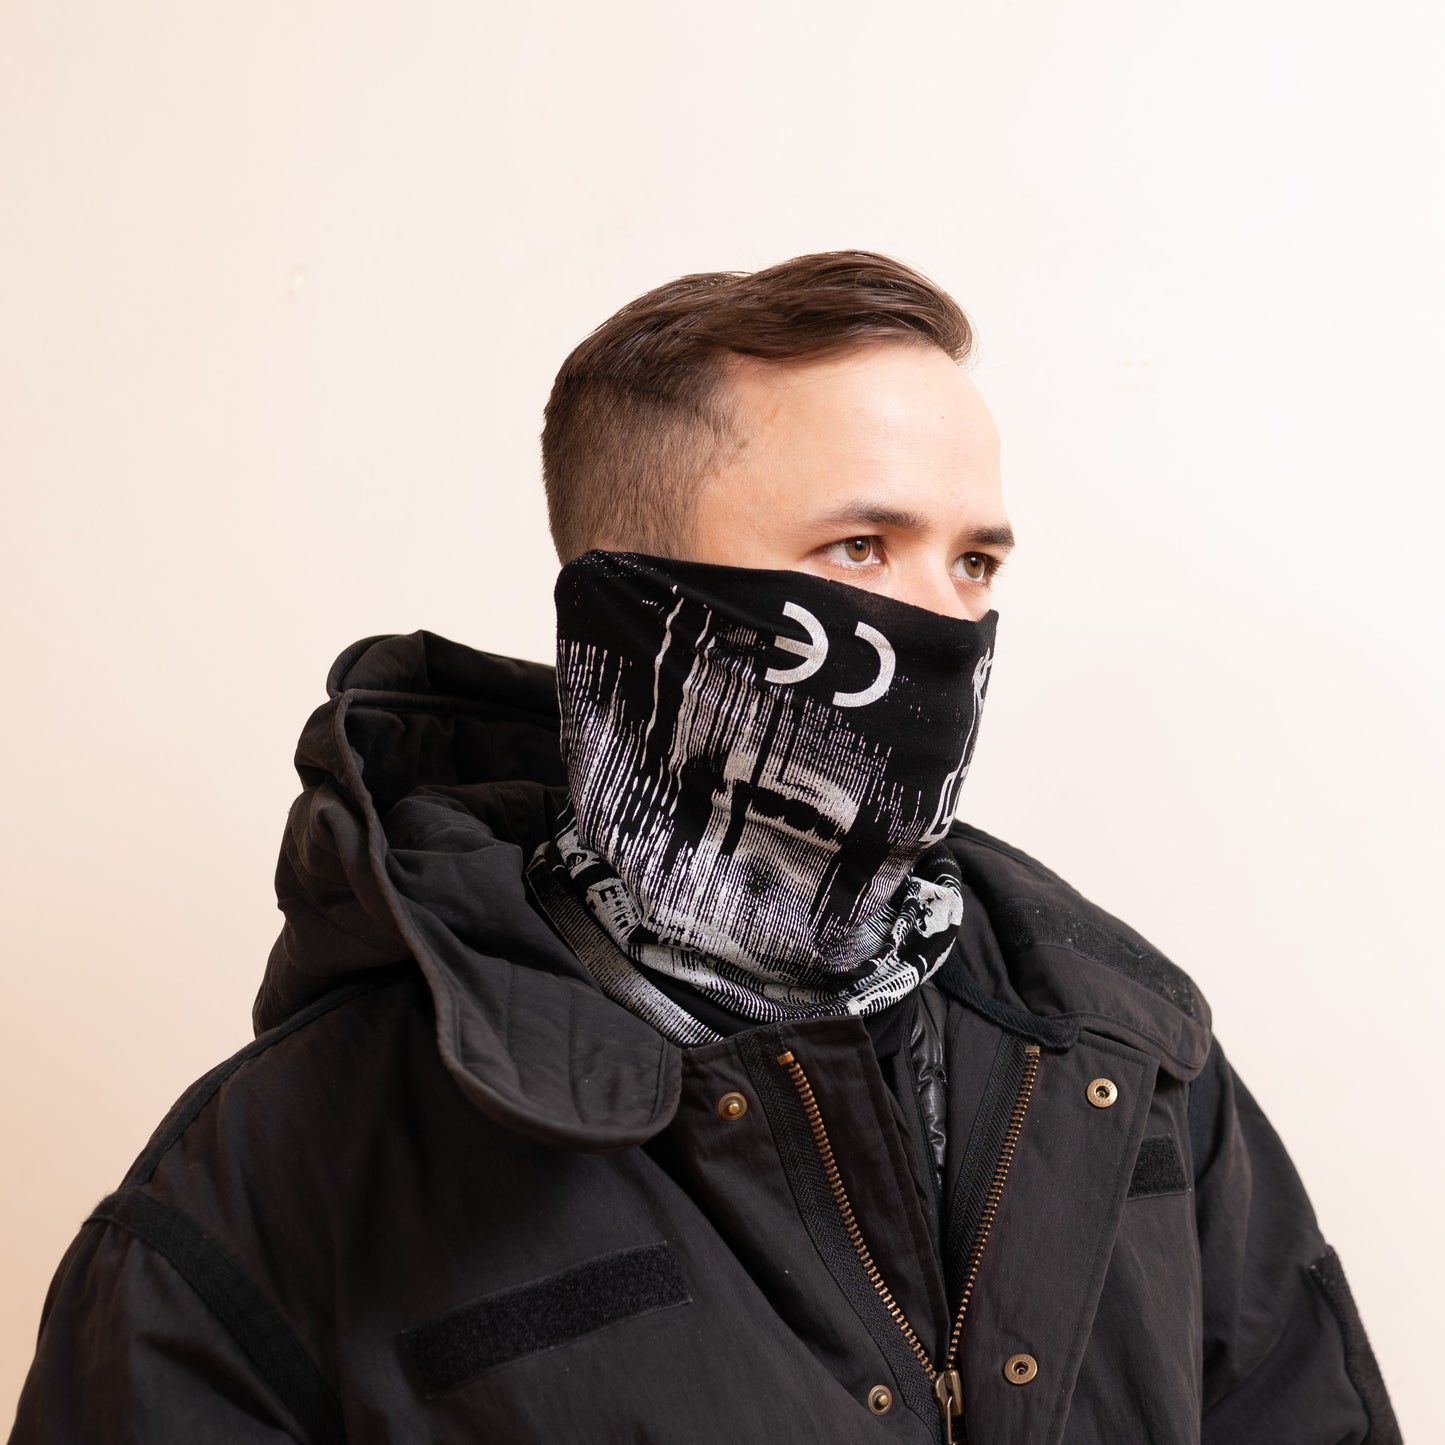 Cav Empt Disguise Mask #1 (2014FW)